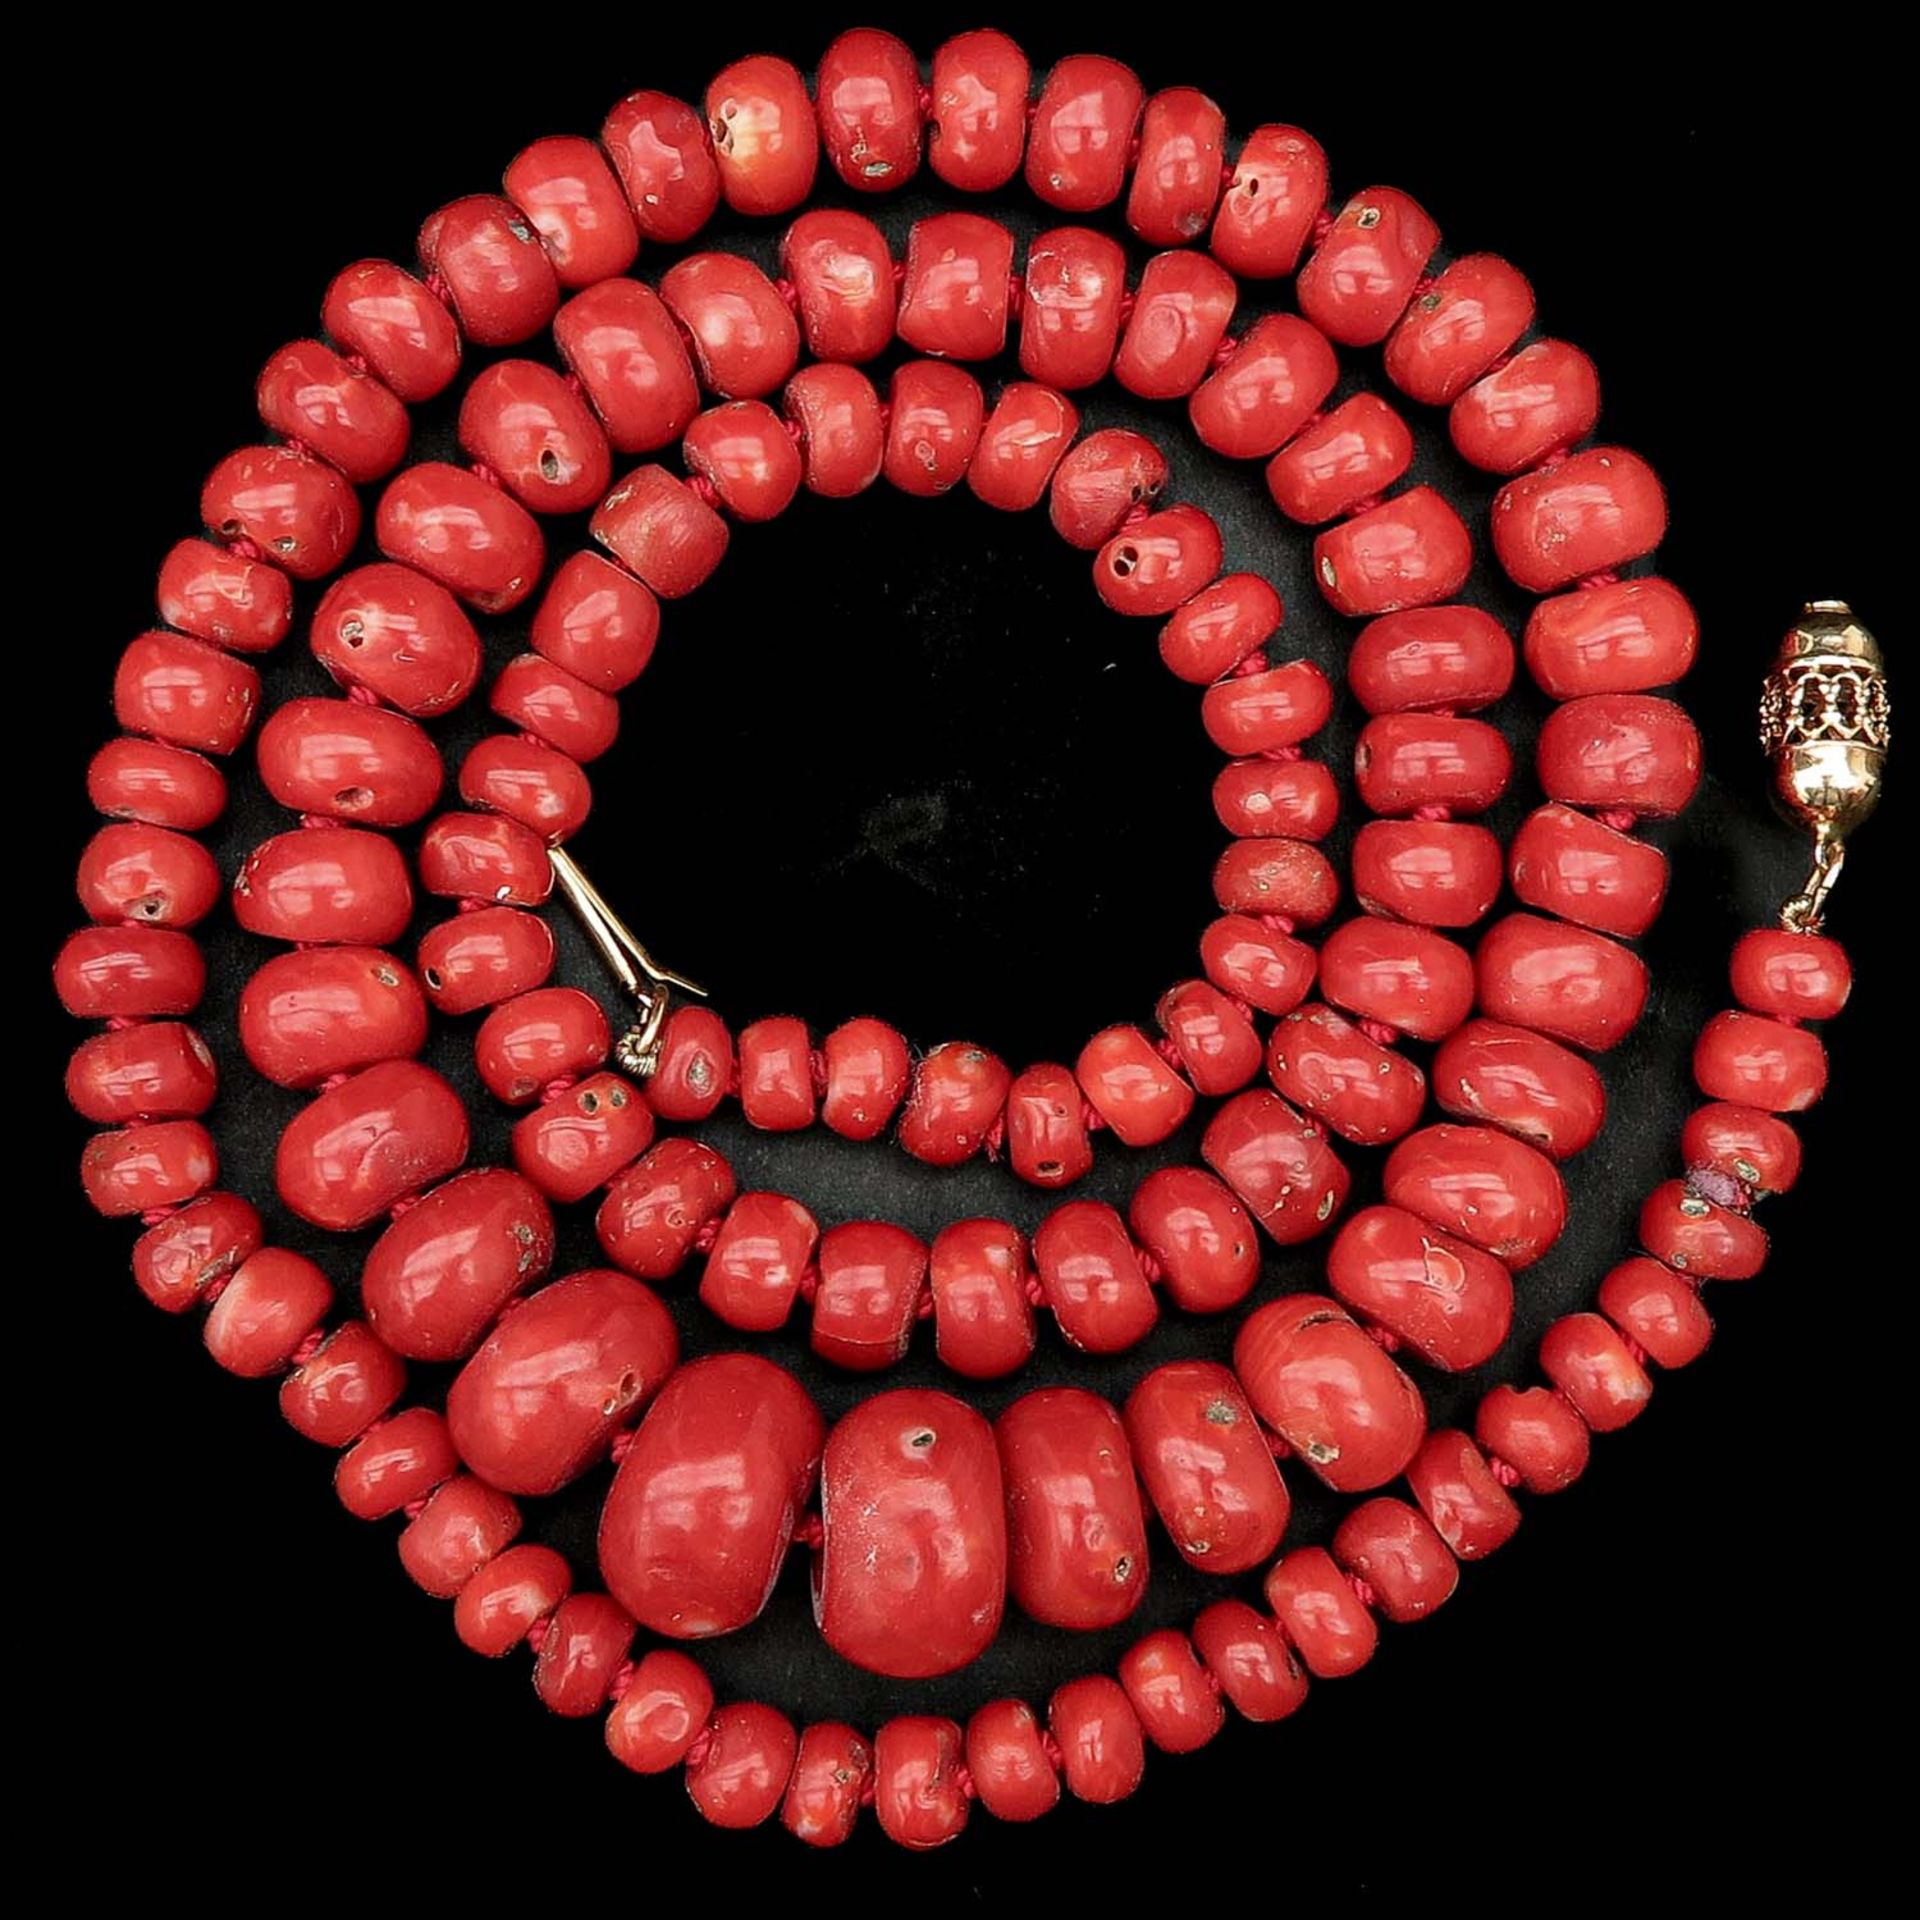 A Single Strand Deep Red Red Coral Necklace - Image 4 of 5